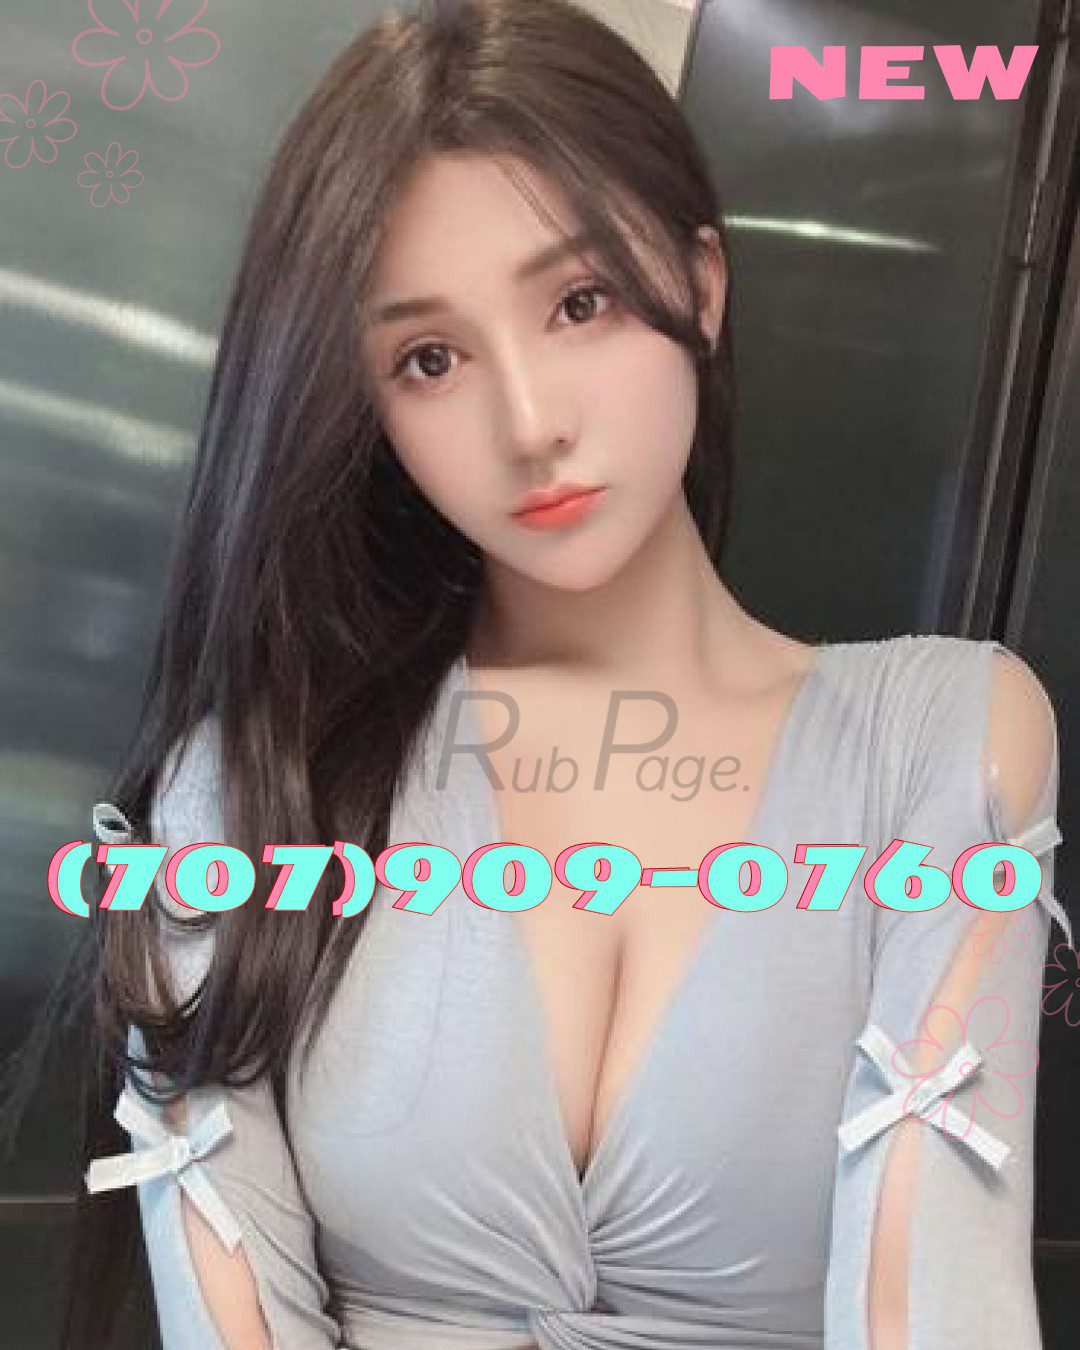 ⭐Soft Relax Touch ❤️ Sweet Asian Massage ☎️ (707)909-0760 ✔️ ⫸⫸⫸ 💋 Top VIP Service 💋